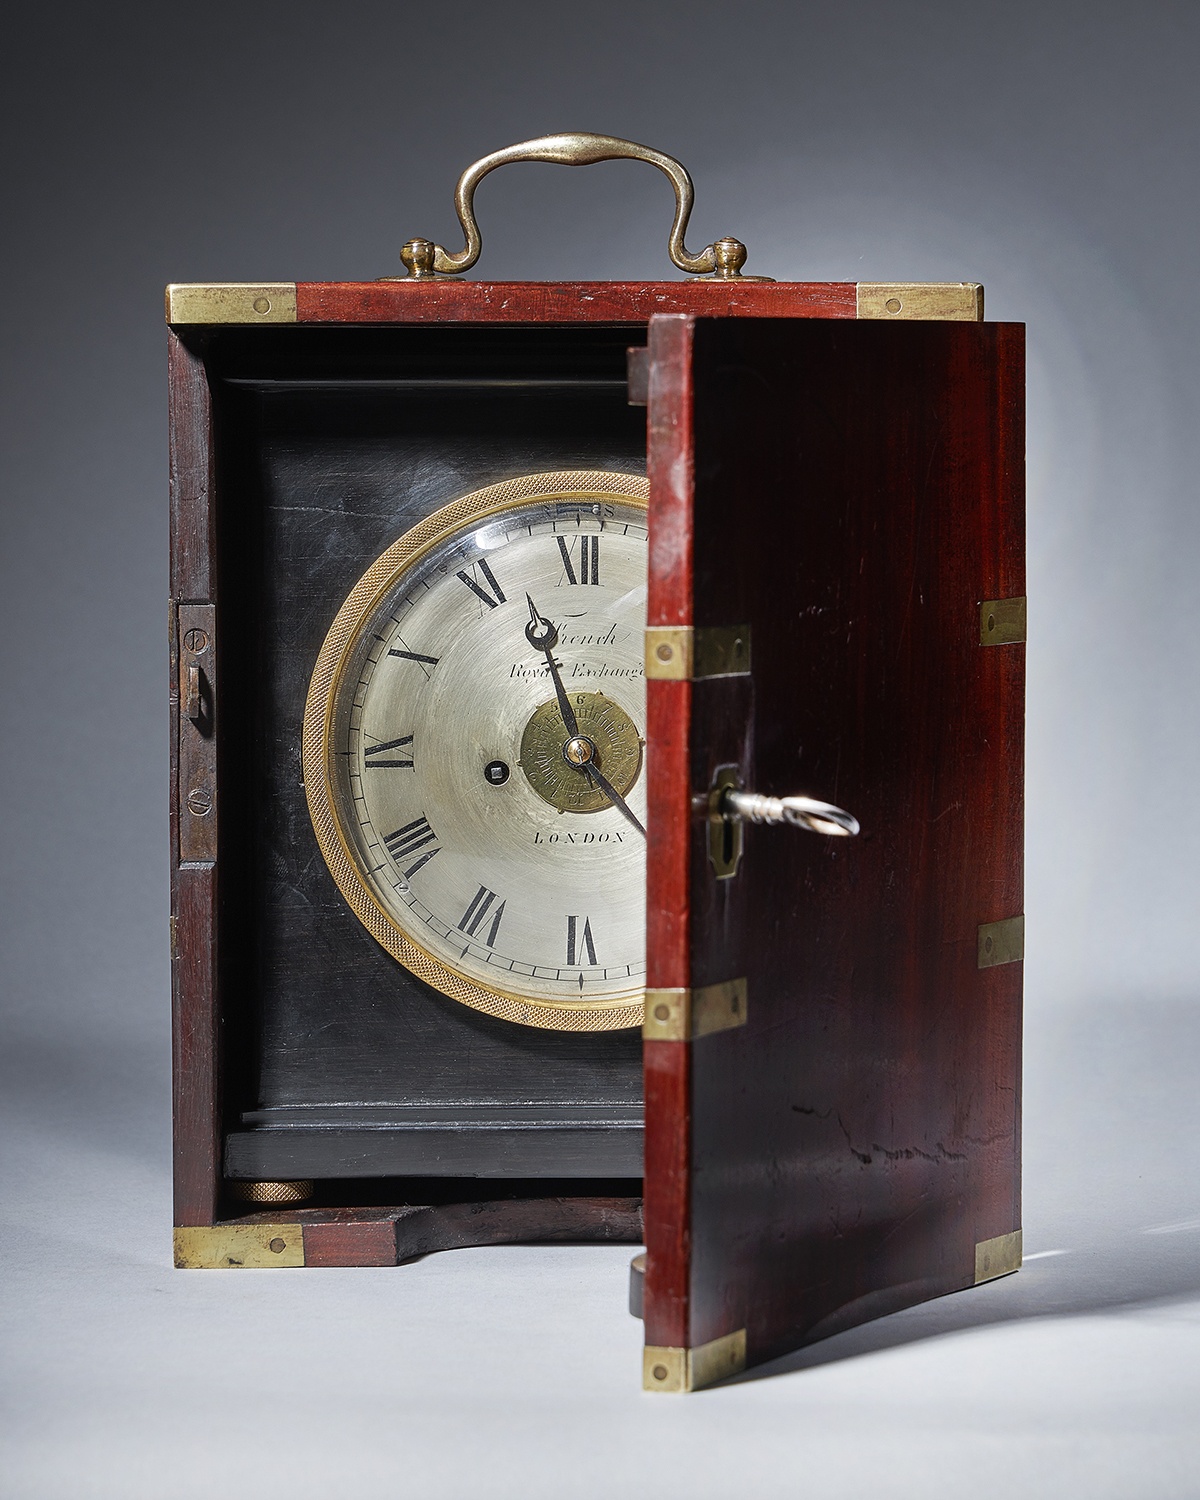 A unique early ninetieth-century travelling clock signed French Royal Exchange LONDON 3